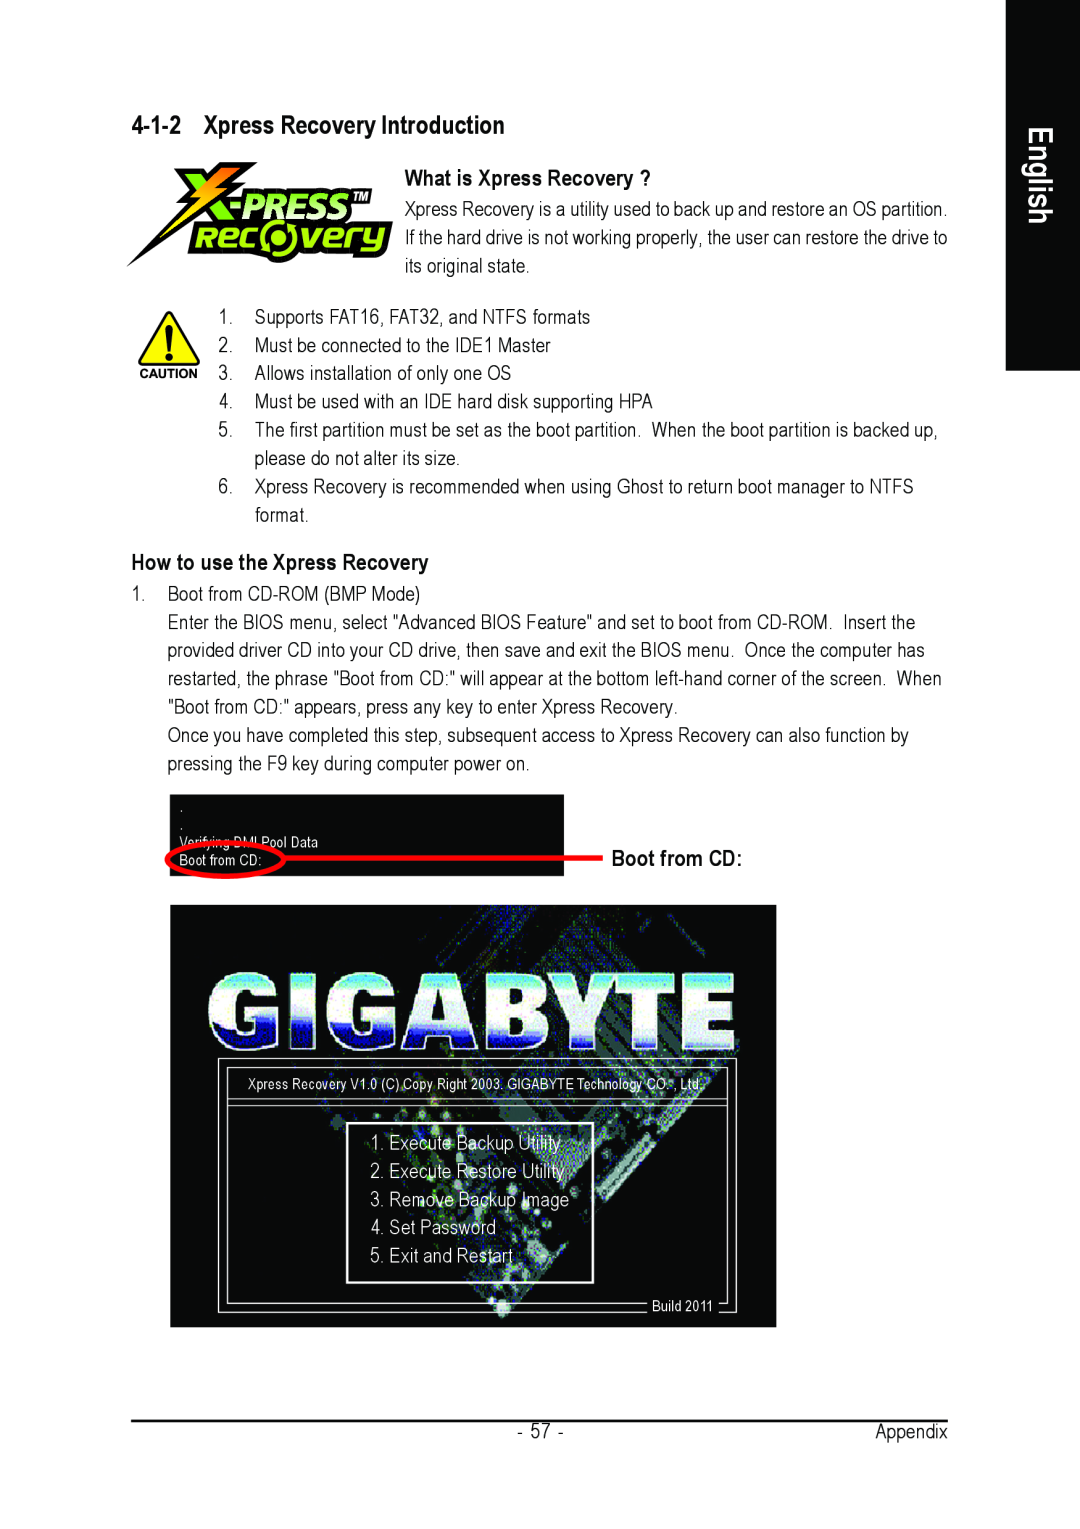 Gigabyte GA-8AENXP-D Xpress Recovery Introduction, What is Xpress Recovery ?, How to use the Xpress Recovery, English 